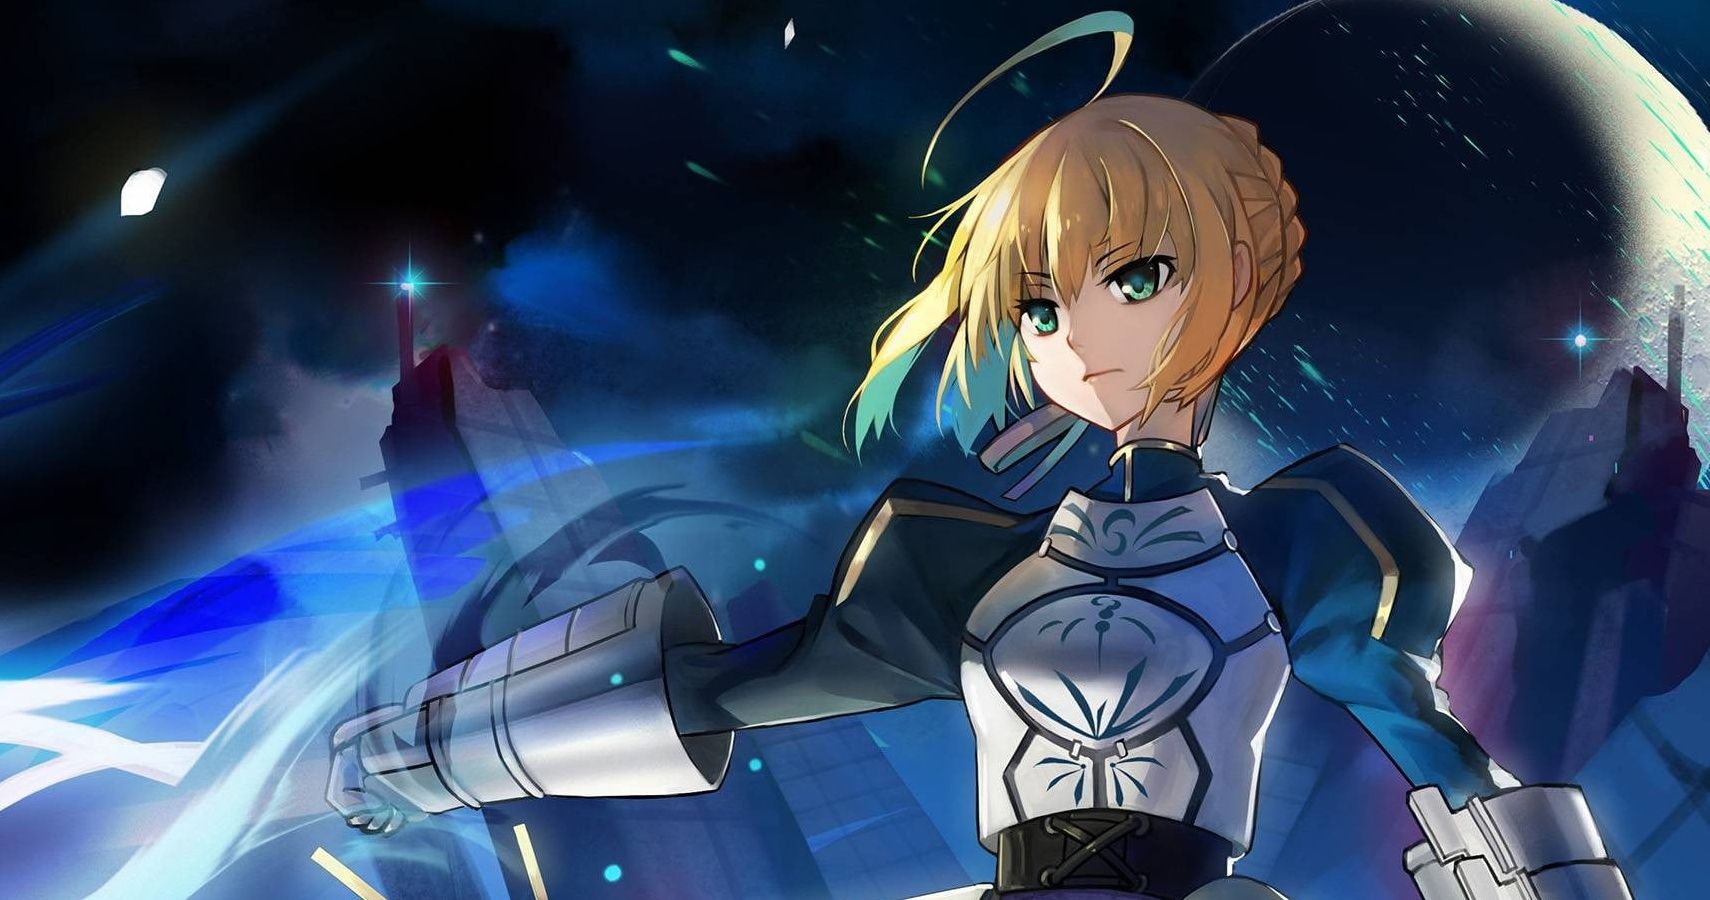 About - Saber